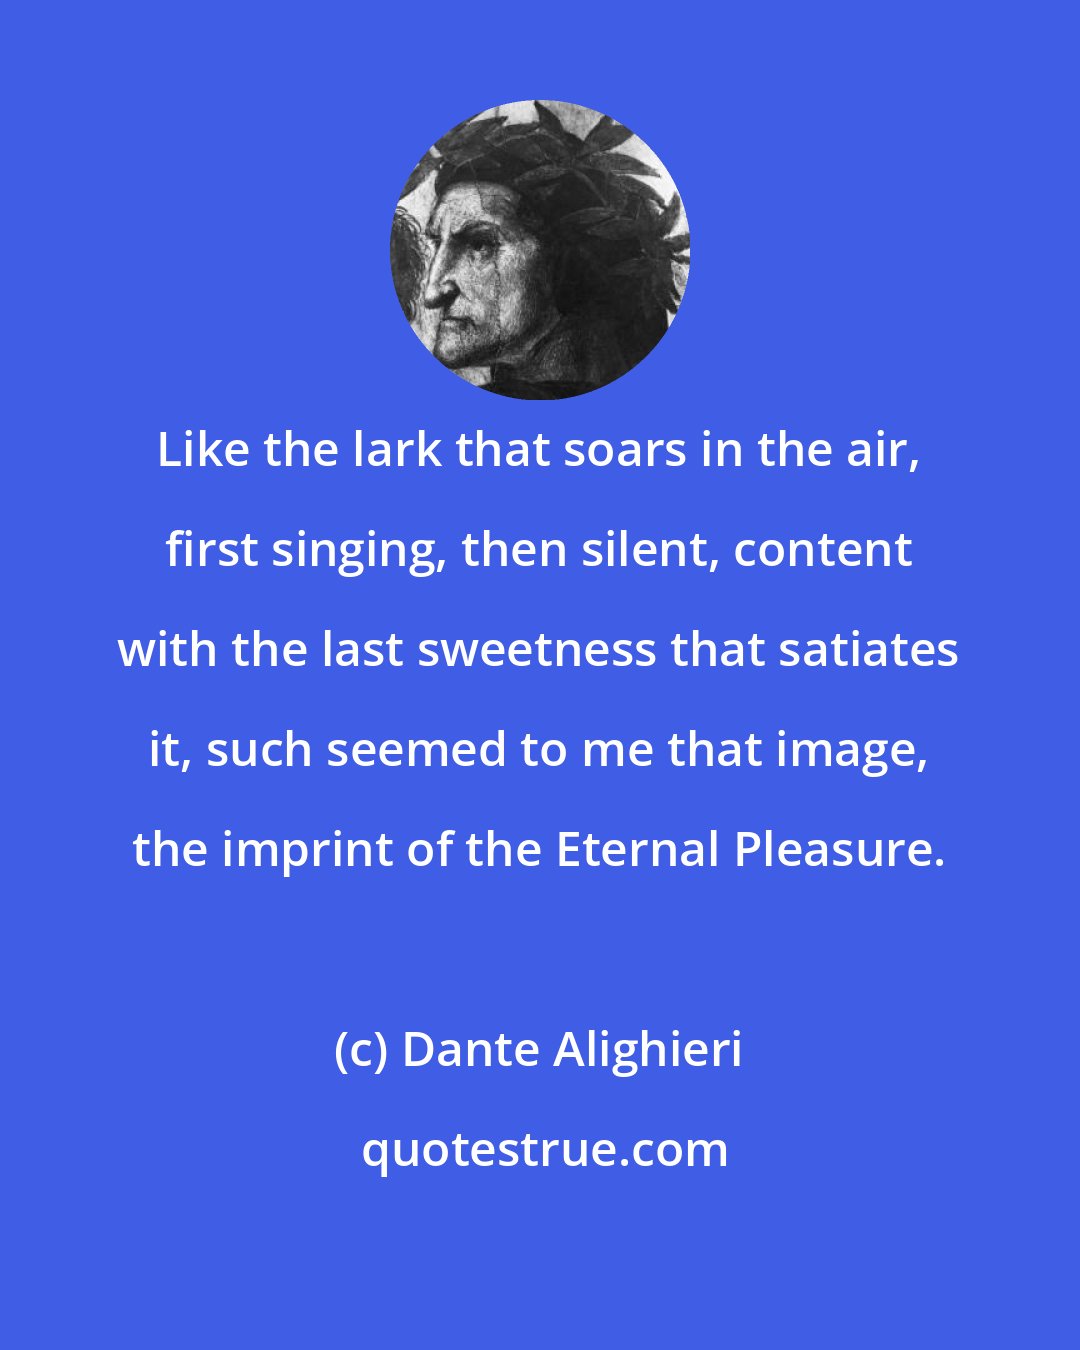 Dante Alighieri: Like the lark that soars in the air, first singing, then silent, content with the last sweetness that satiates it, such seemed to me that image, the imprint of the Eternal Pleasure.